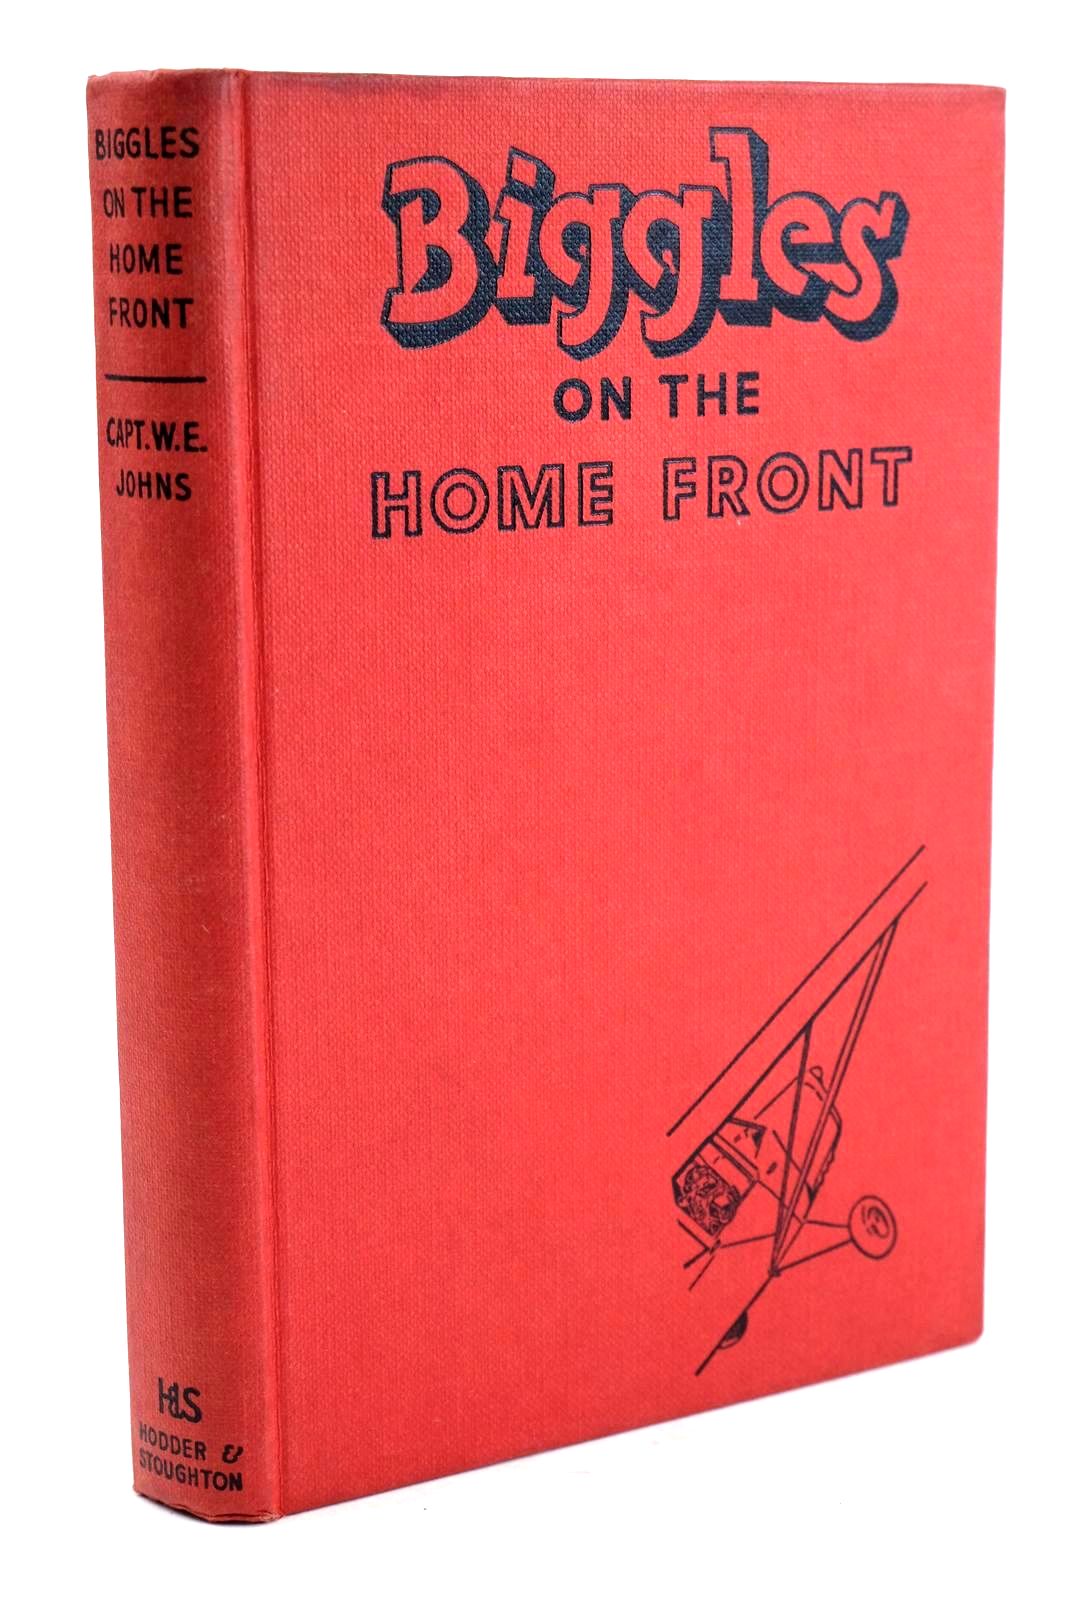 Photo of BIGGLES ON THE HOME FRONT written by Johns, W.E. illustrated by Stead,  published by Hodder & Stoughton (STOCK CODE: 1324256)  for sale by Stella & Rose's Books